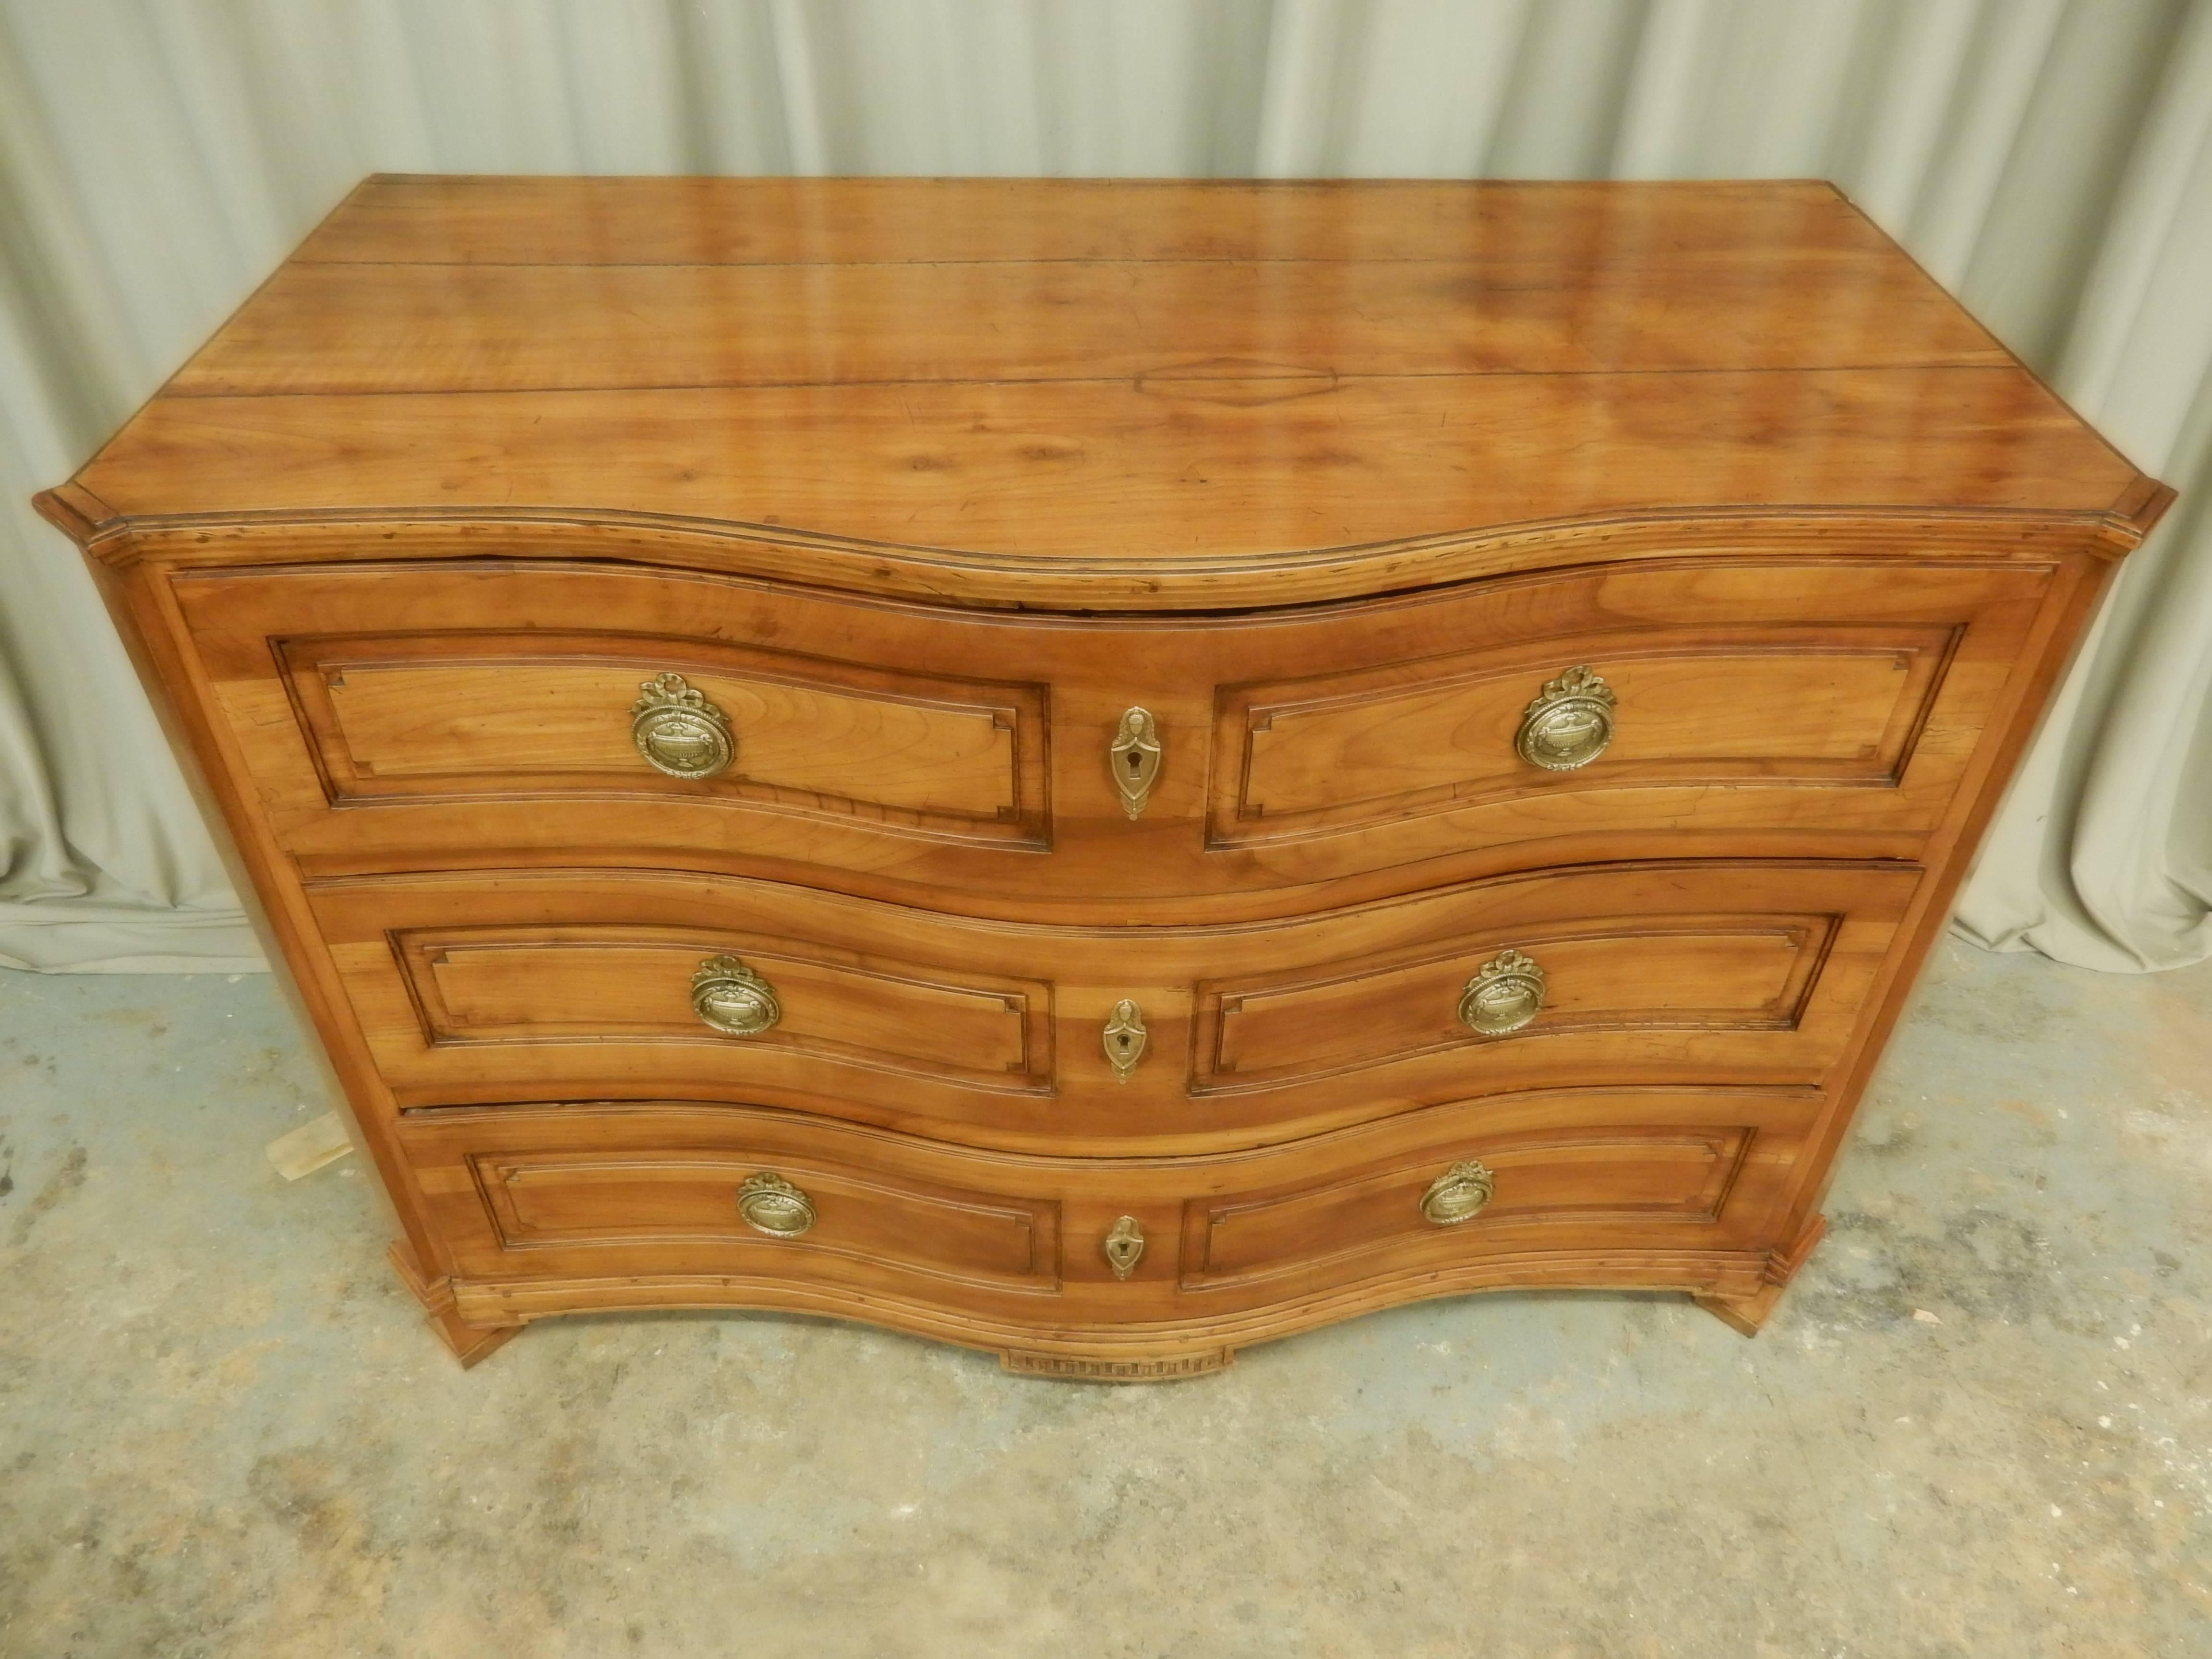 Beautiful serpentine front three-drawer Northern Italian fruitwood commode. Carefully restored to preserve lovely color and patina.